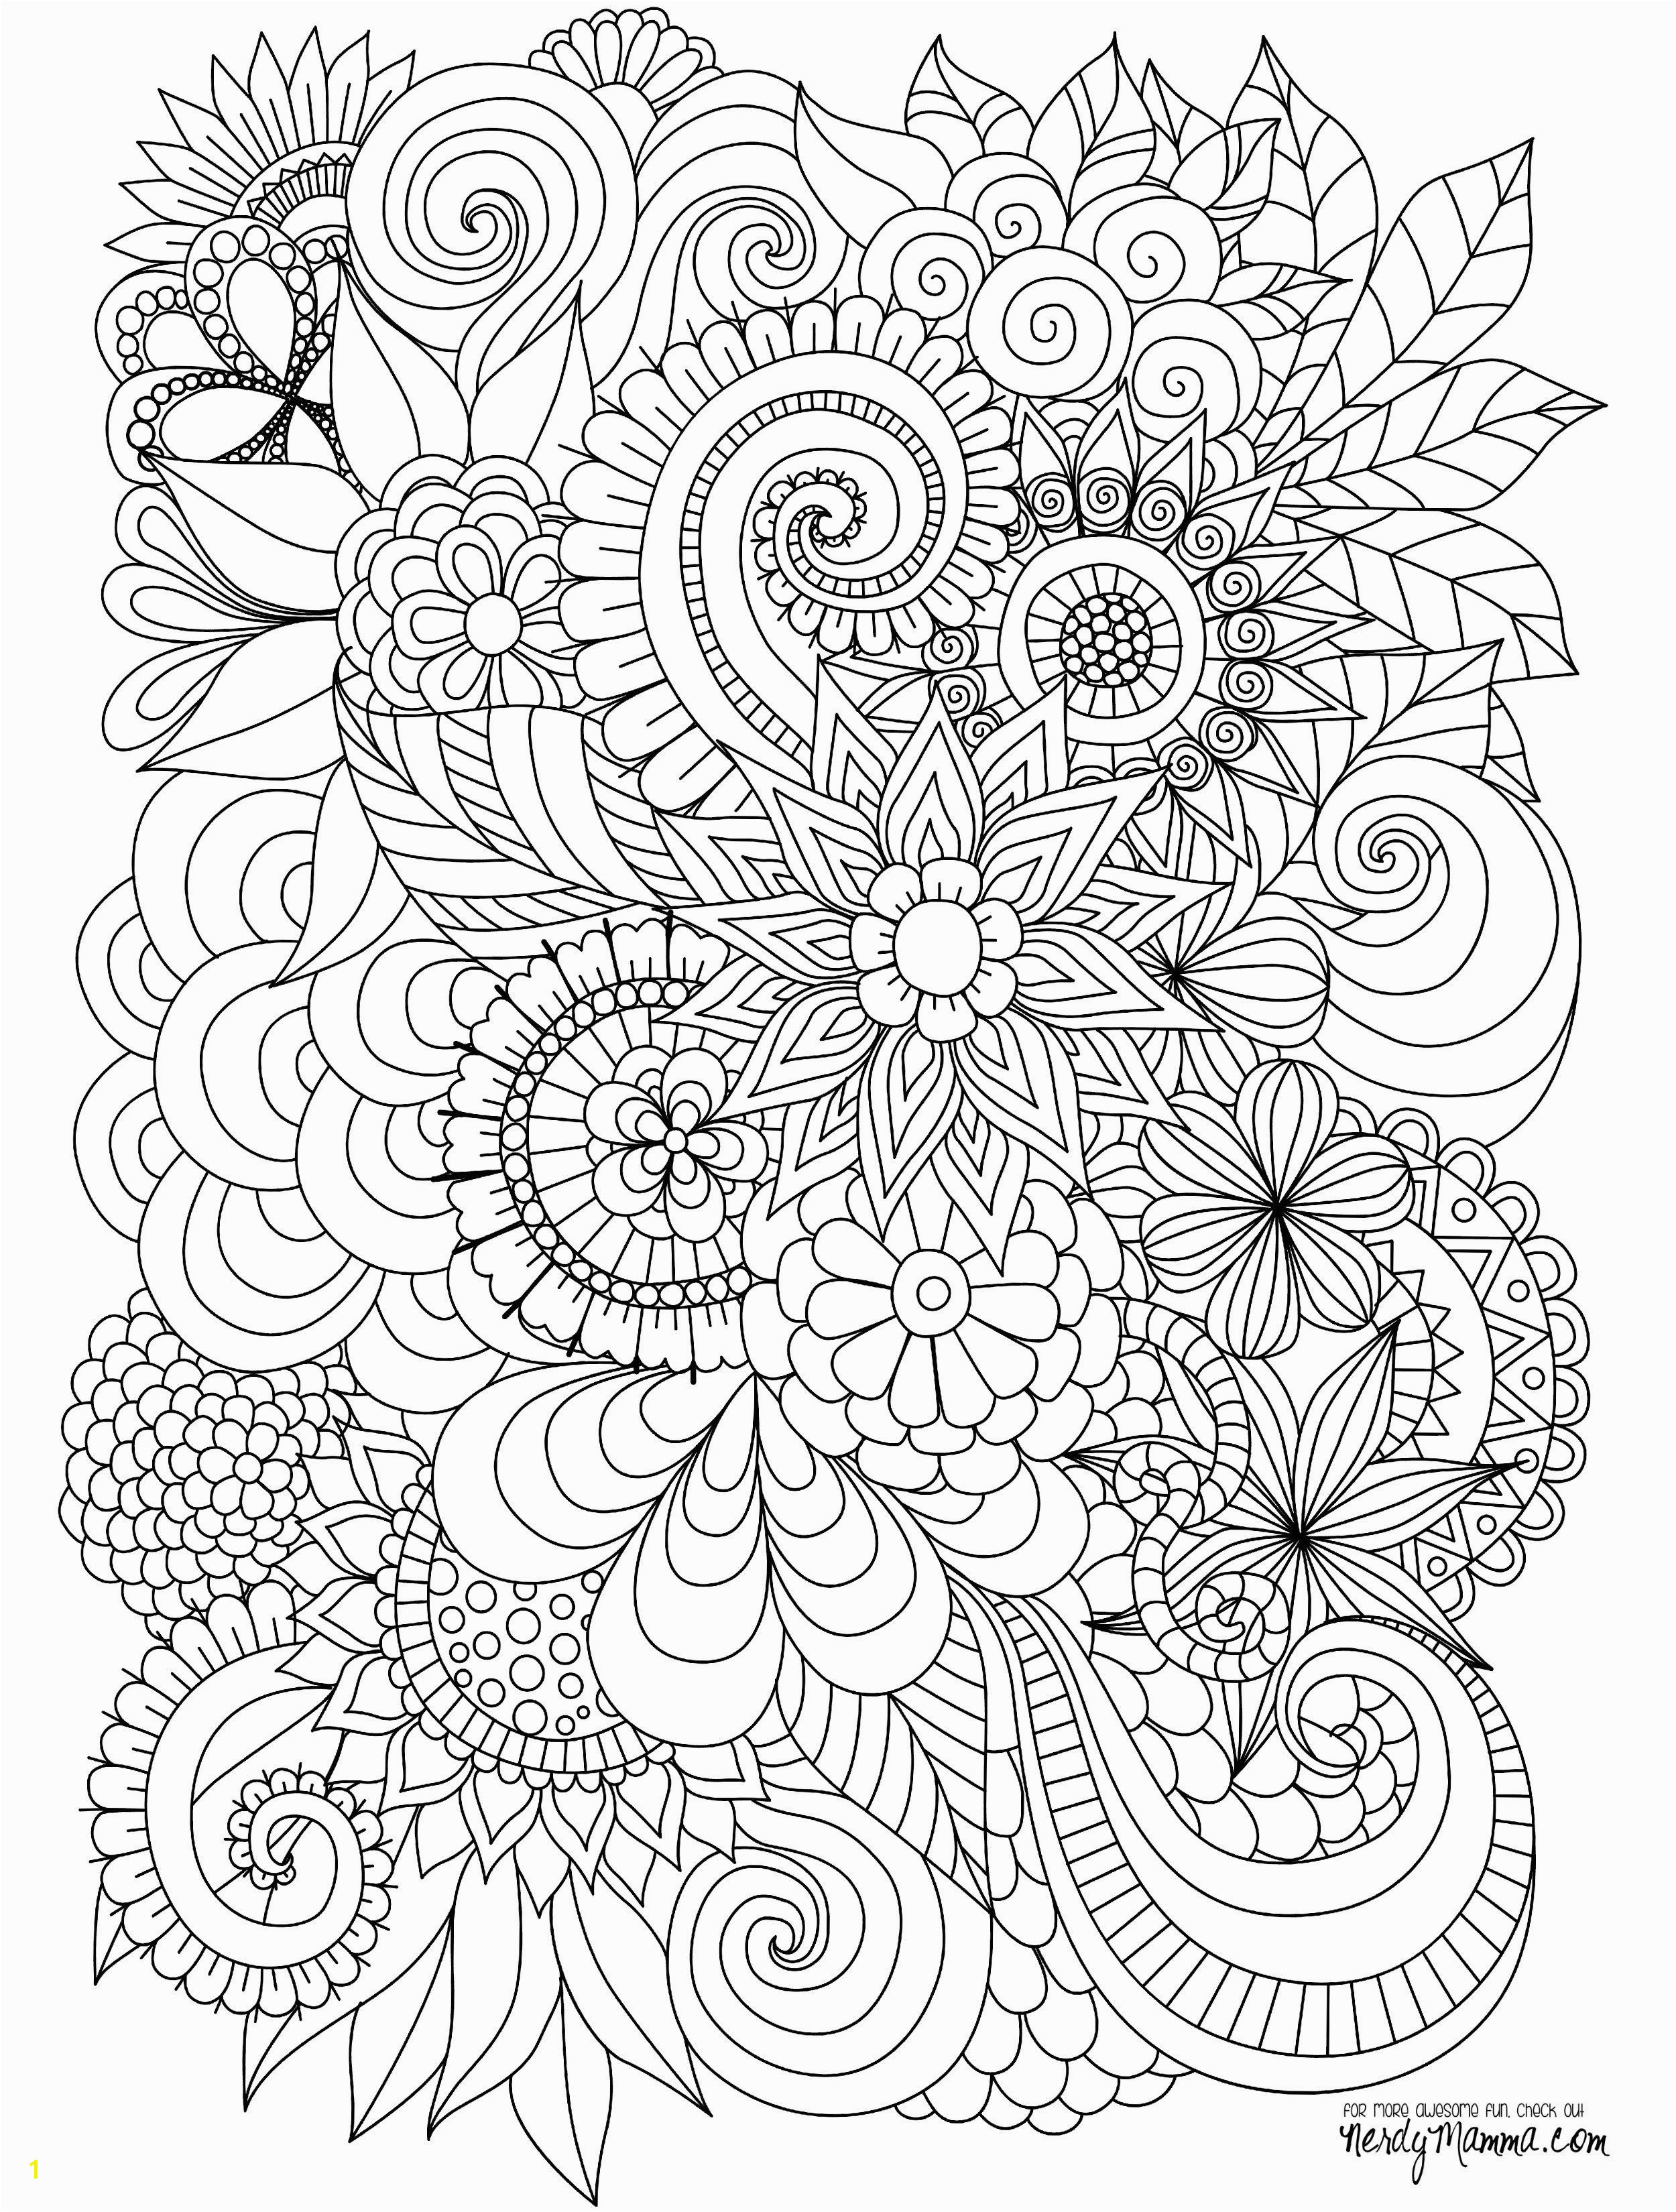 Free Printable Advanced Coloring Pages for Adults Flowers Abstract Coloring Pages Colouring Adult Detailed Advanced